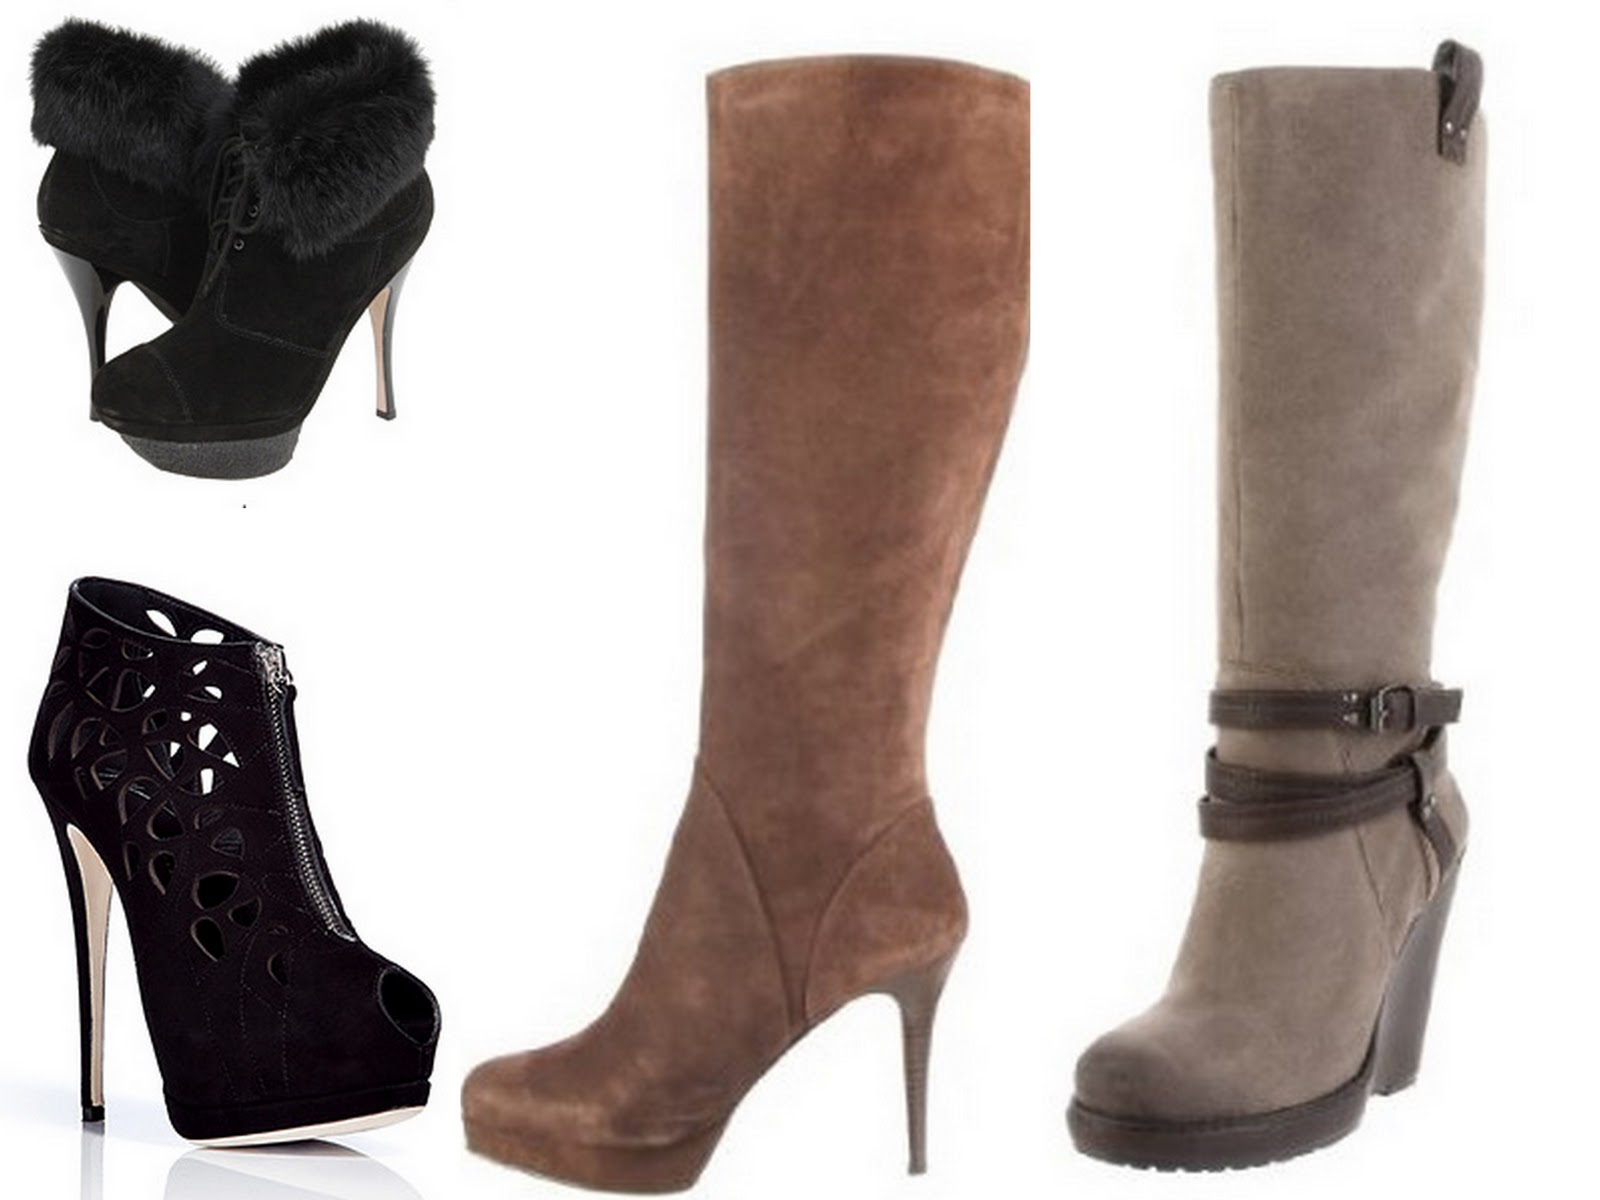 Pretty Cute and Outrageous: Fabulous Winter Boots for Toasty Warm Feet